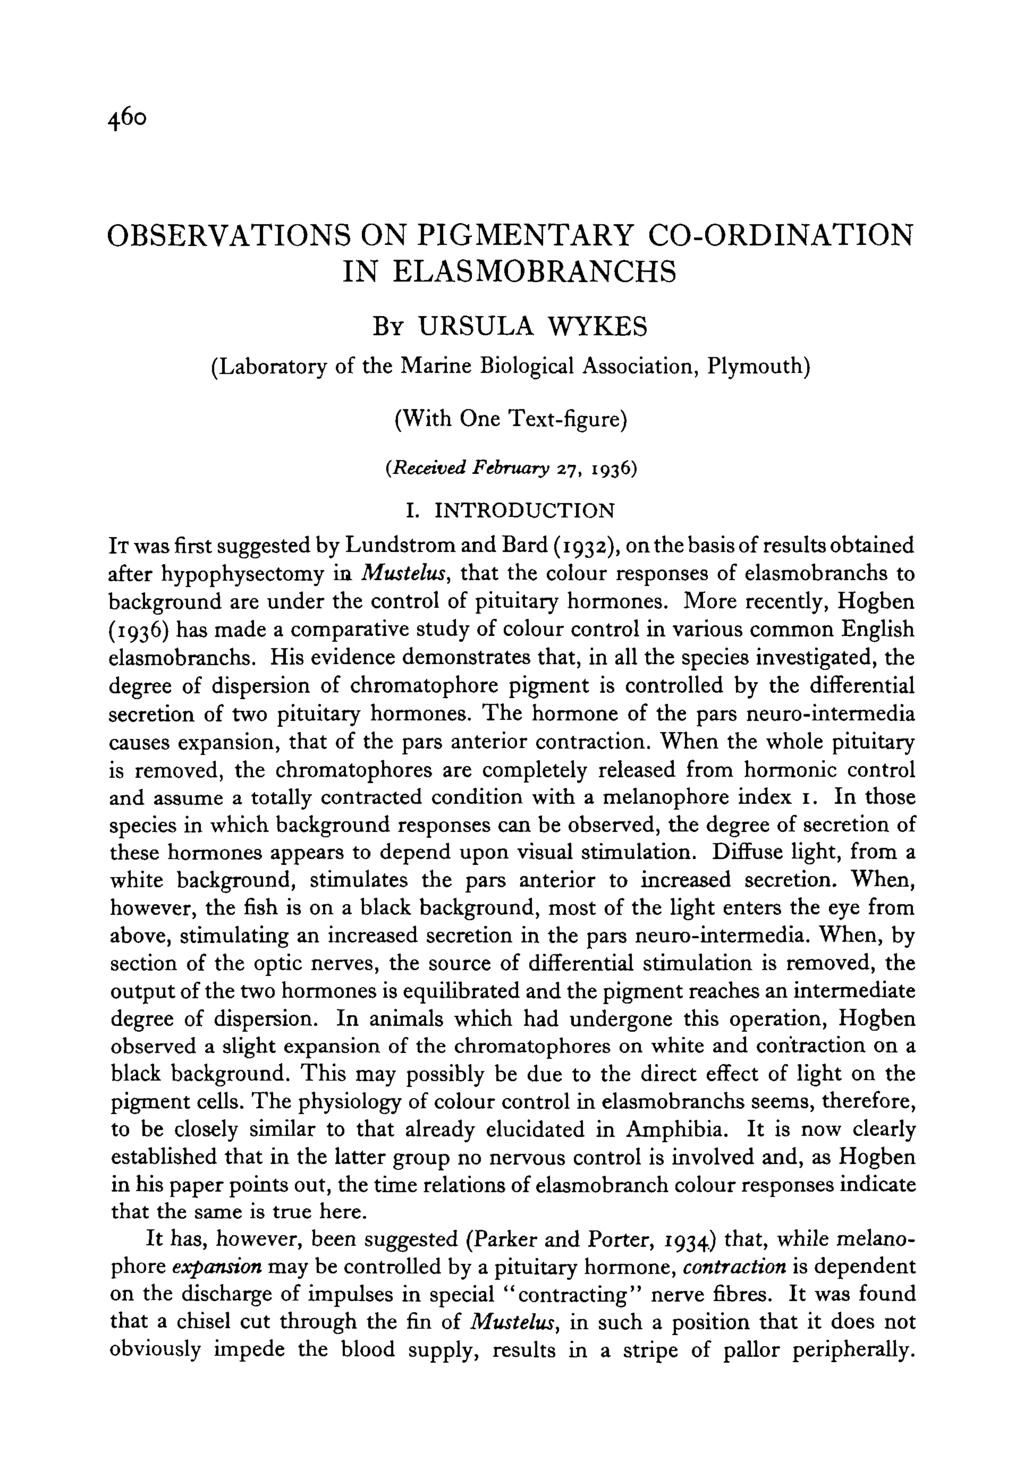 460 OBSERVATIONS ON PIGMENTARY CO-ORDINATION IN ELASMOBRANCHS BY URSULA WYKES (Laboratory of the Marine Biological Association, Plymouth) (With One Text-figure) (Received February 27, 1936) I.